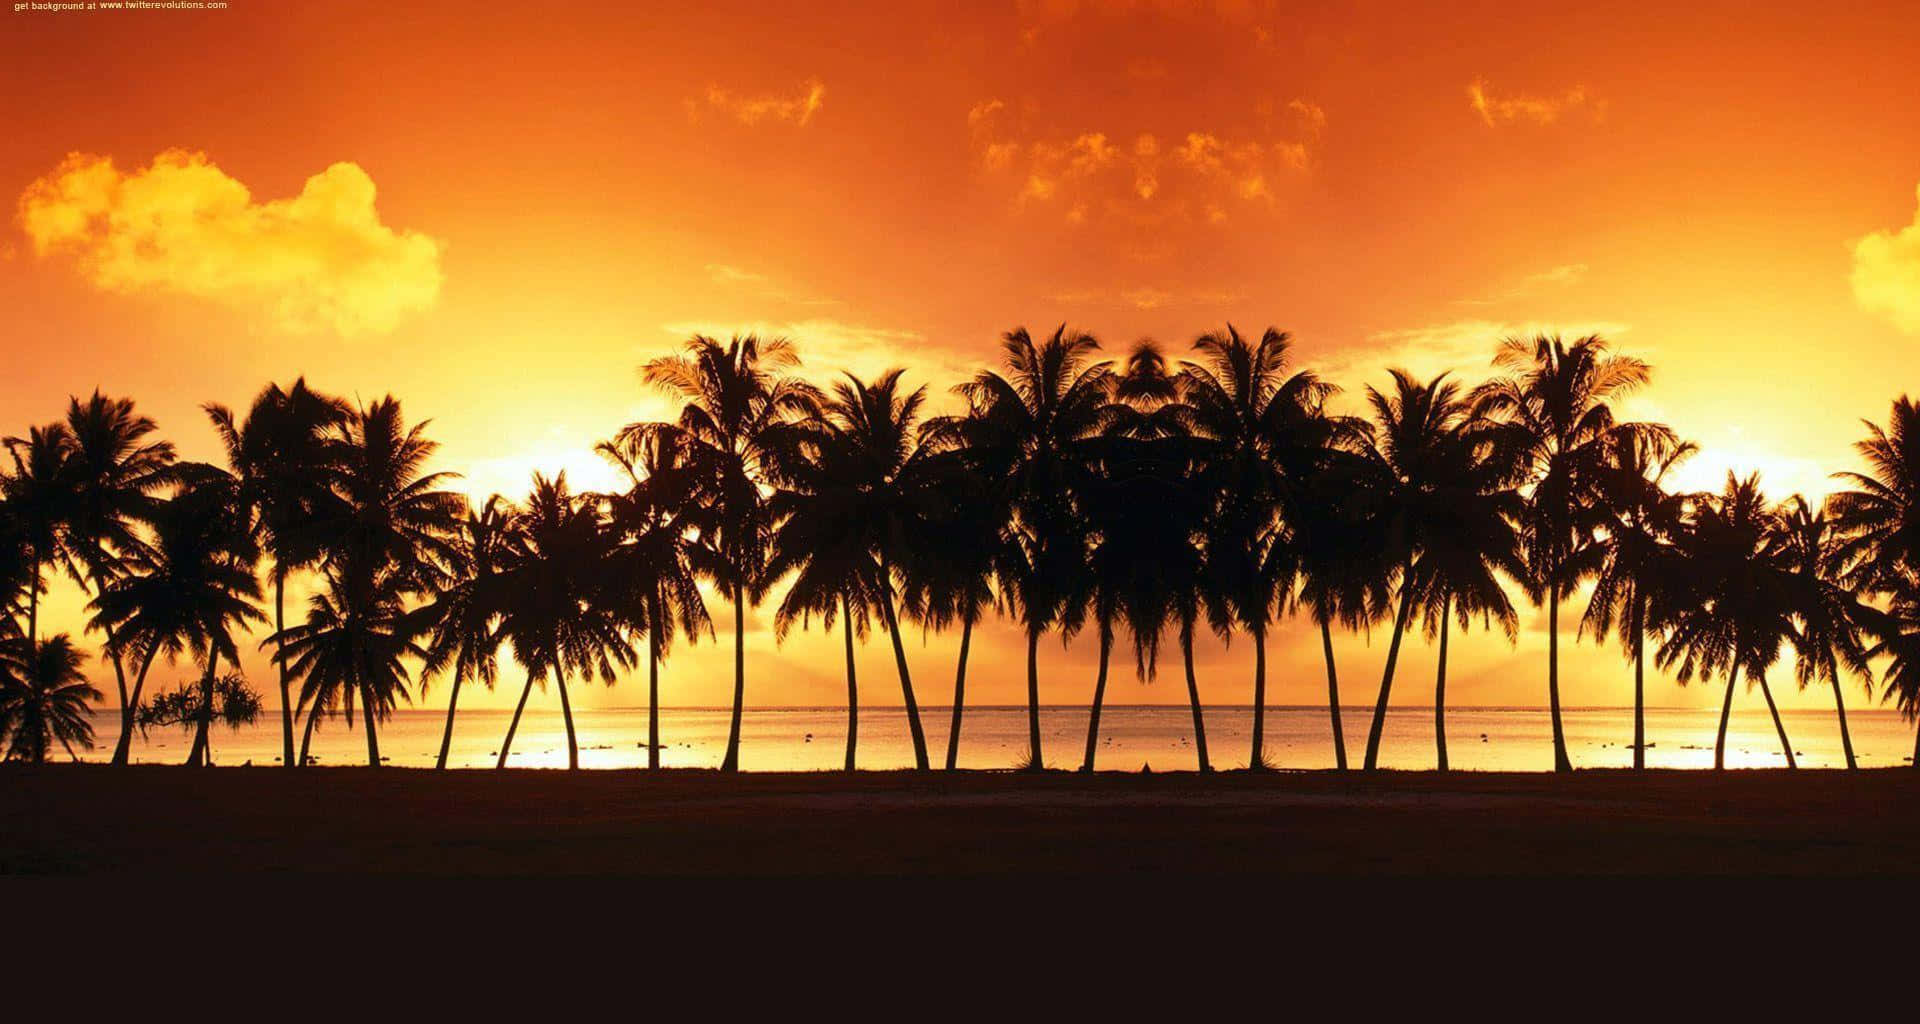 Unwind by the palm tree lined beach